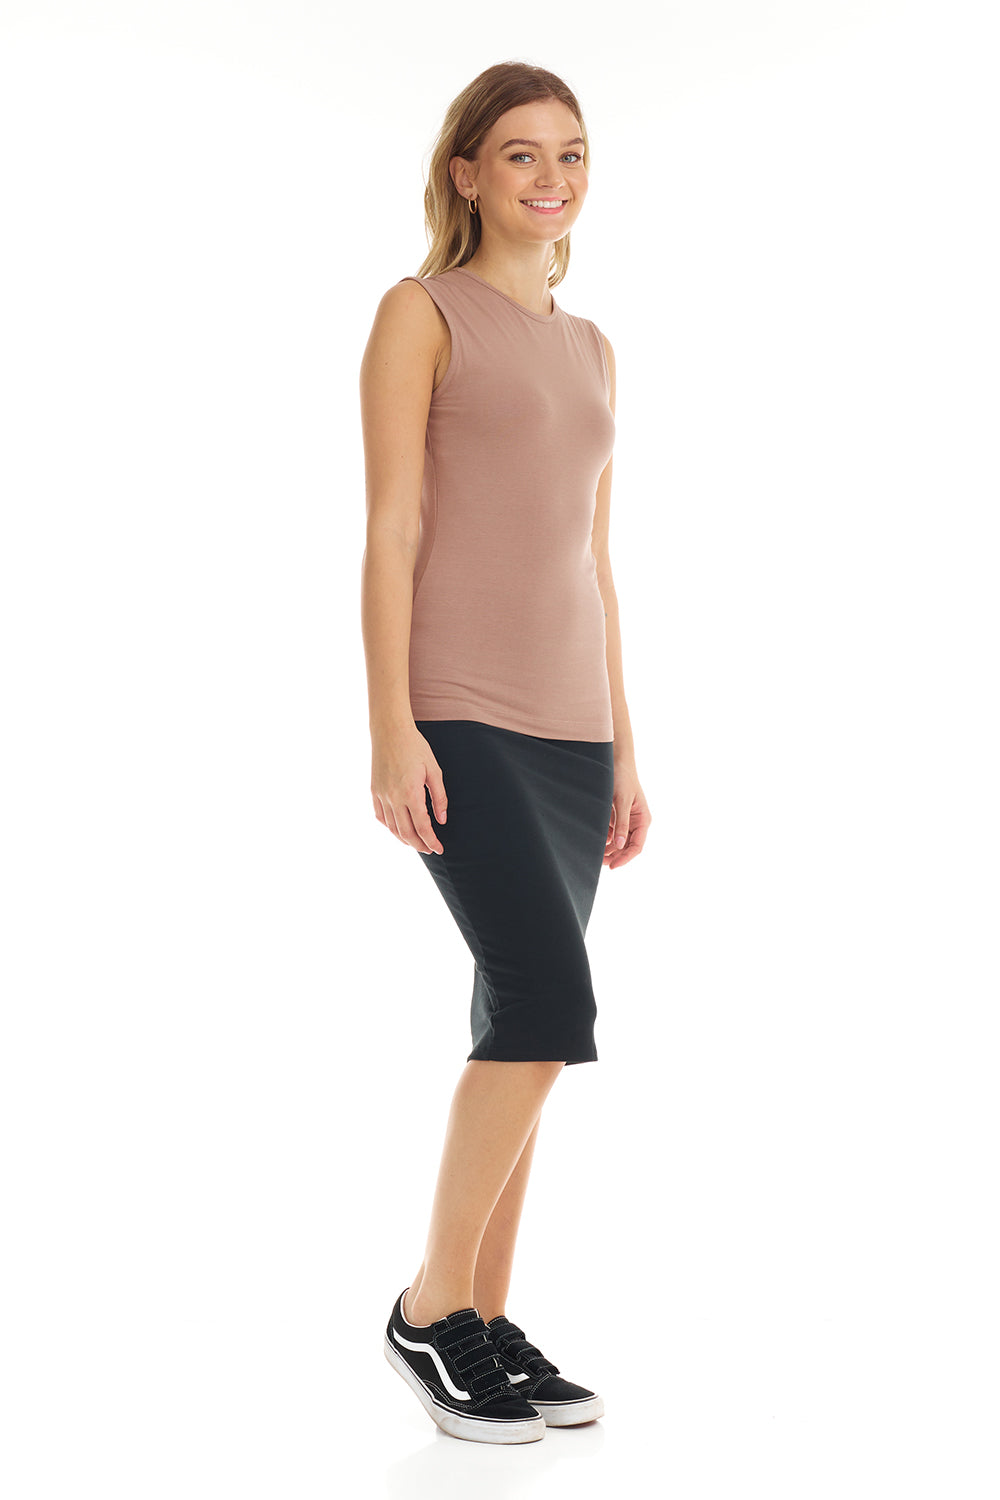 sleeveless shell looks great on its own or with a cardigan